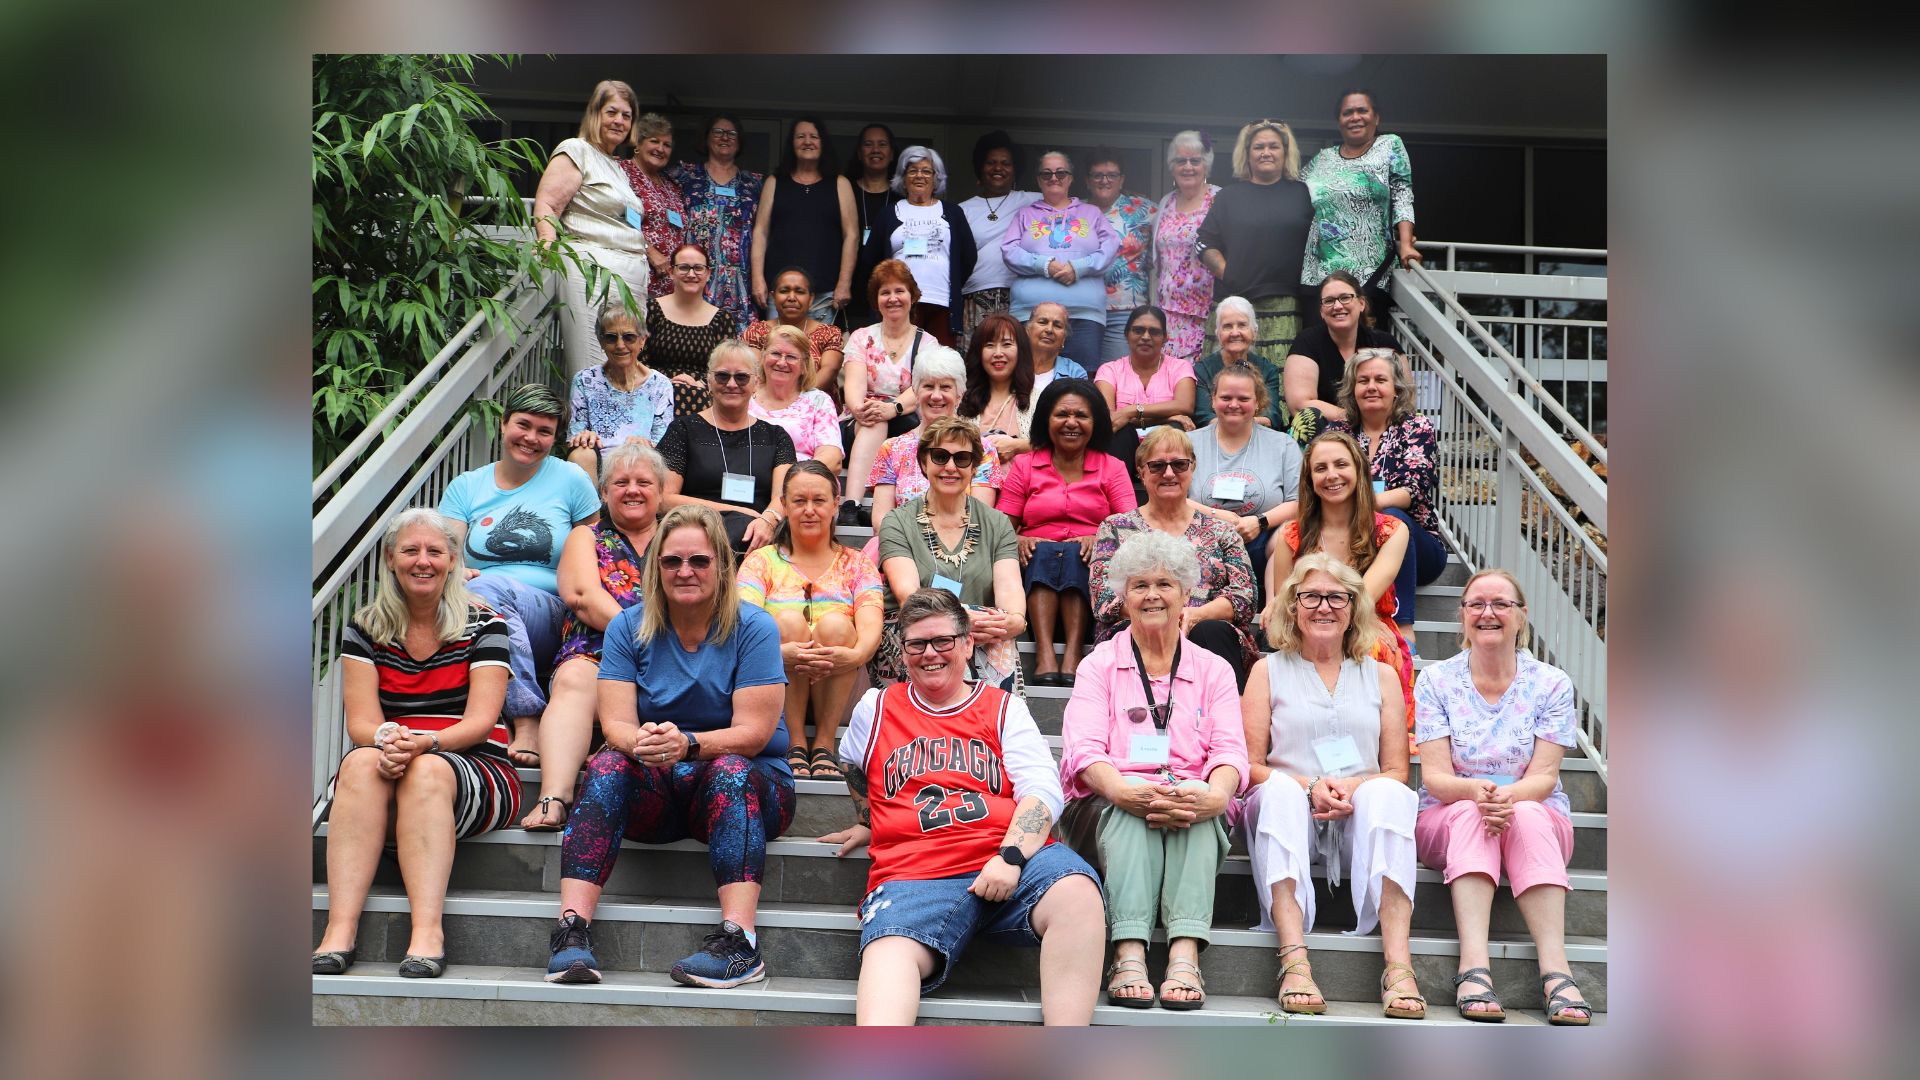 ANWD Ladies Retreat creates space for connection and relationships